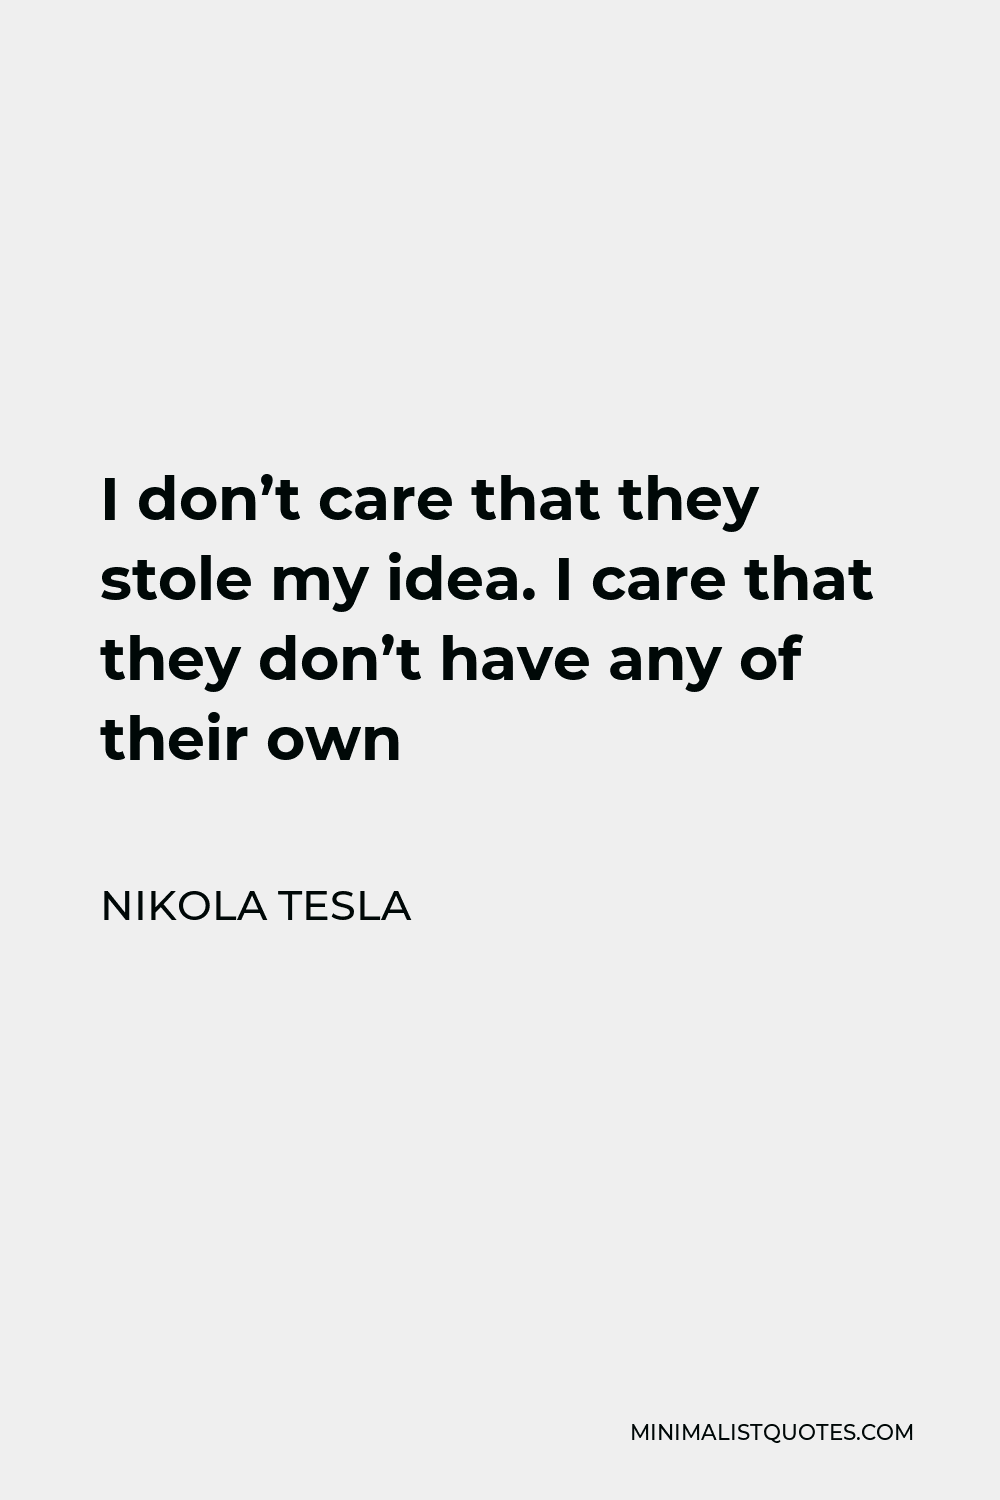 Nikola Tesla Quote - I don’t care that they stole my idea. I care that they don’t have any of their own